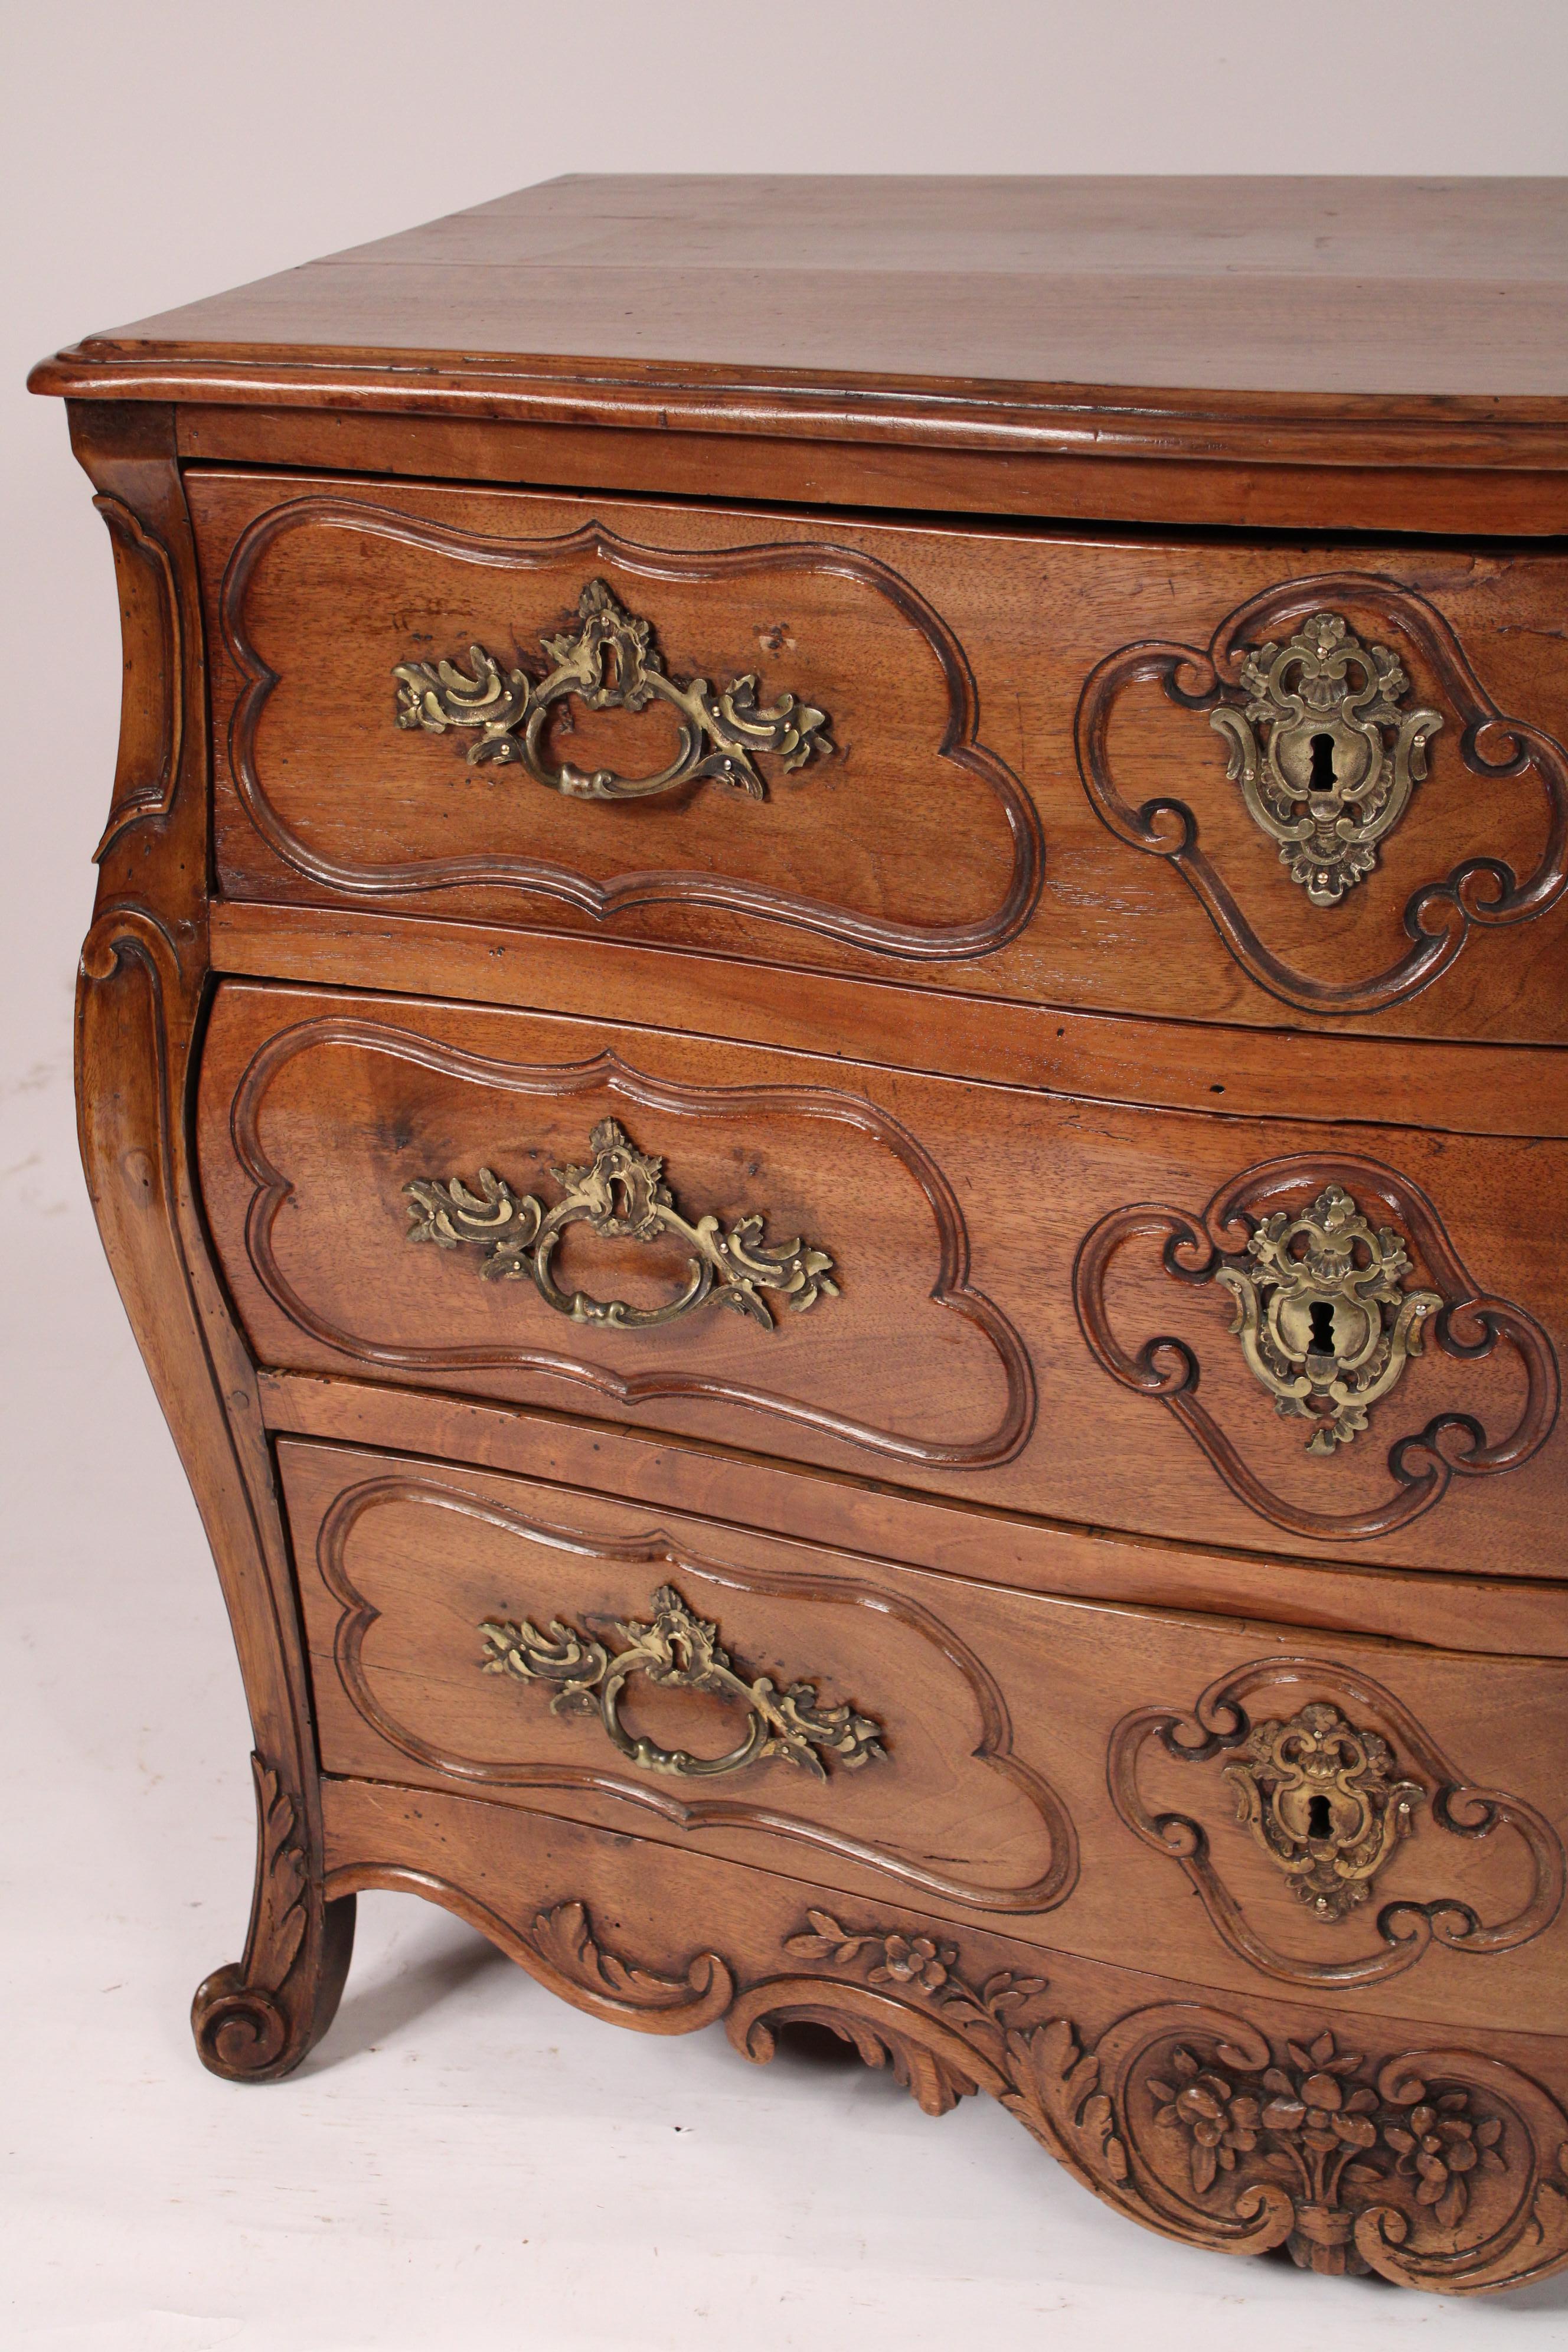 Antique Louis XV Style Provincial Walnut Bombe Chest of Drawers In Good Condition For Sale In Laguna Beach, CA